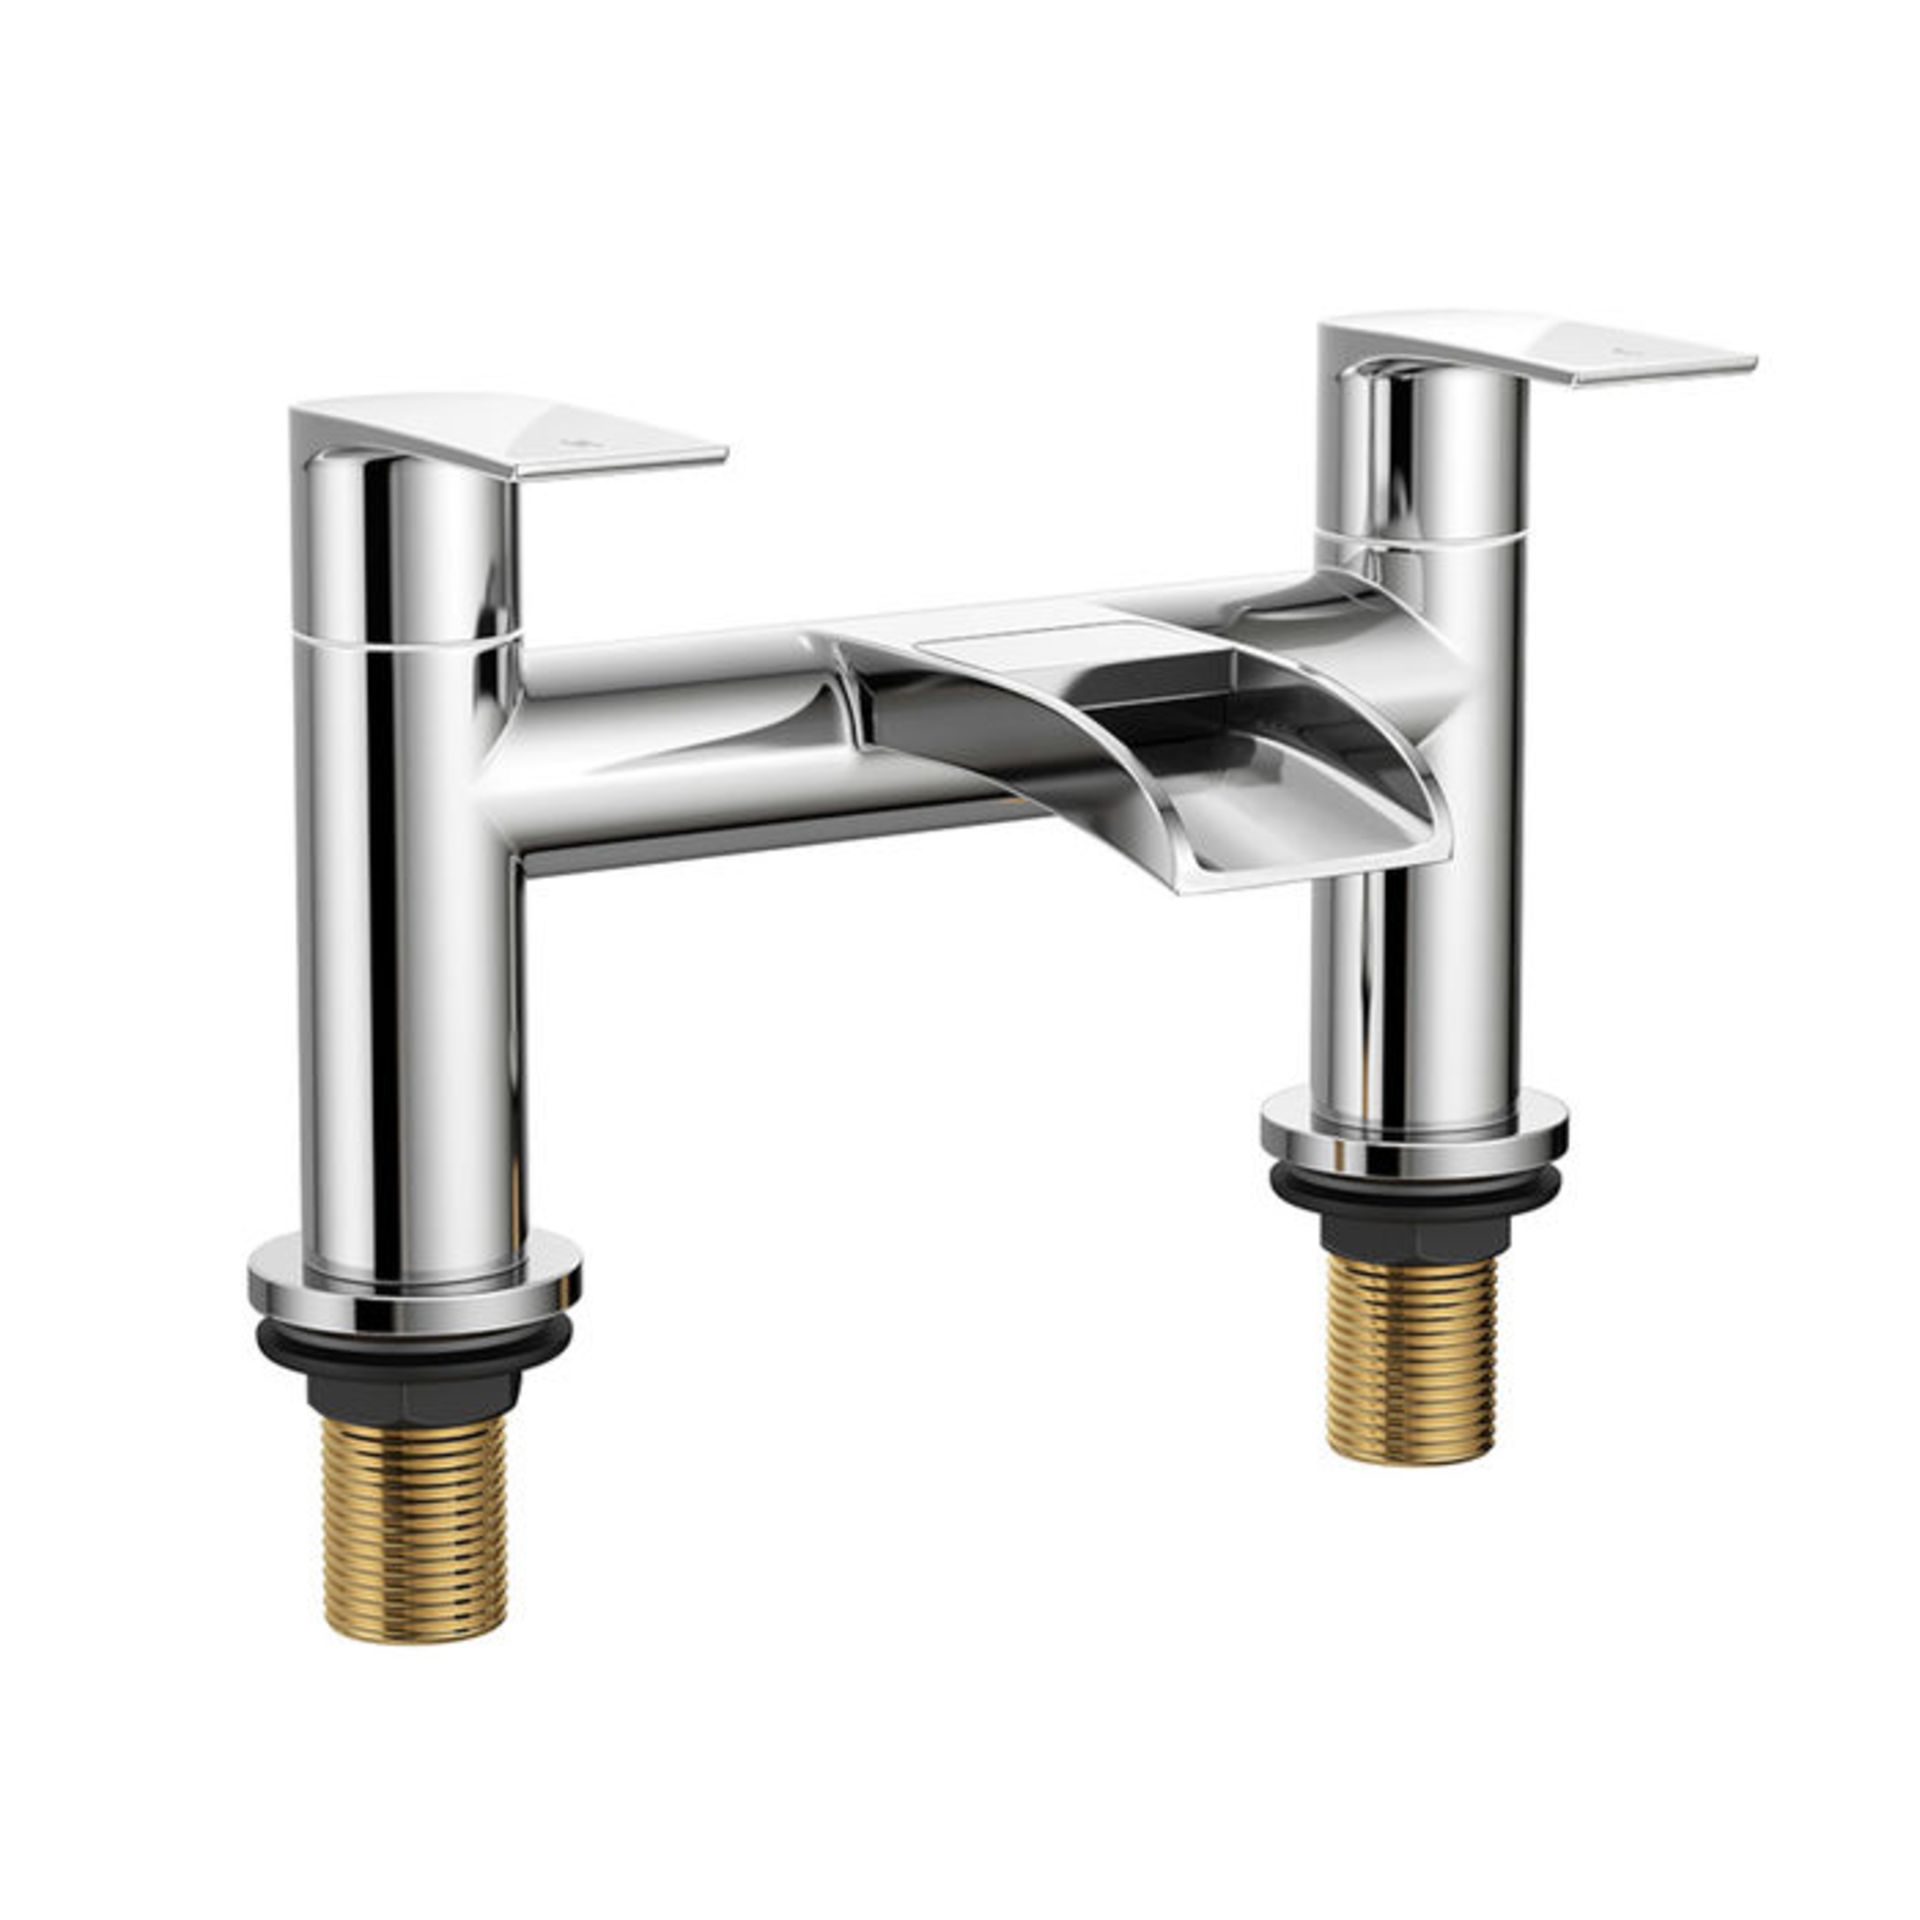 (V184) Denver Waterfall Bath Filler Mixer Tap. Chrome Plated Solid Brass 1/4 turn solid brass - Image 2 of 2